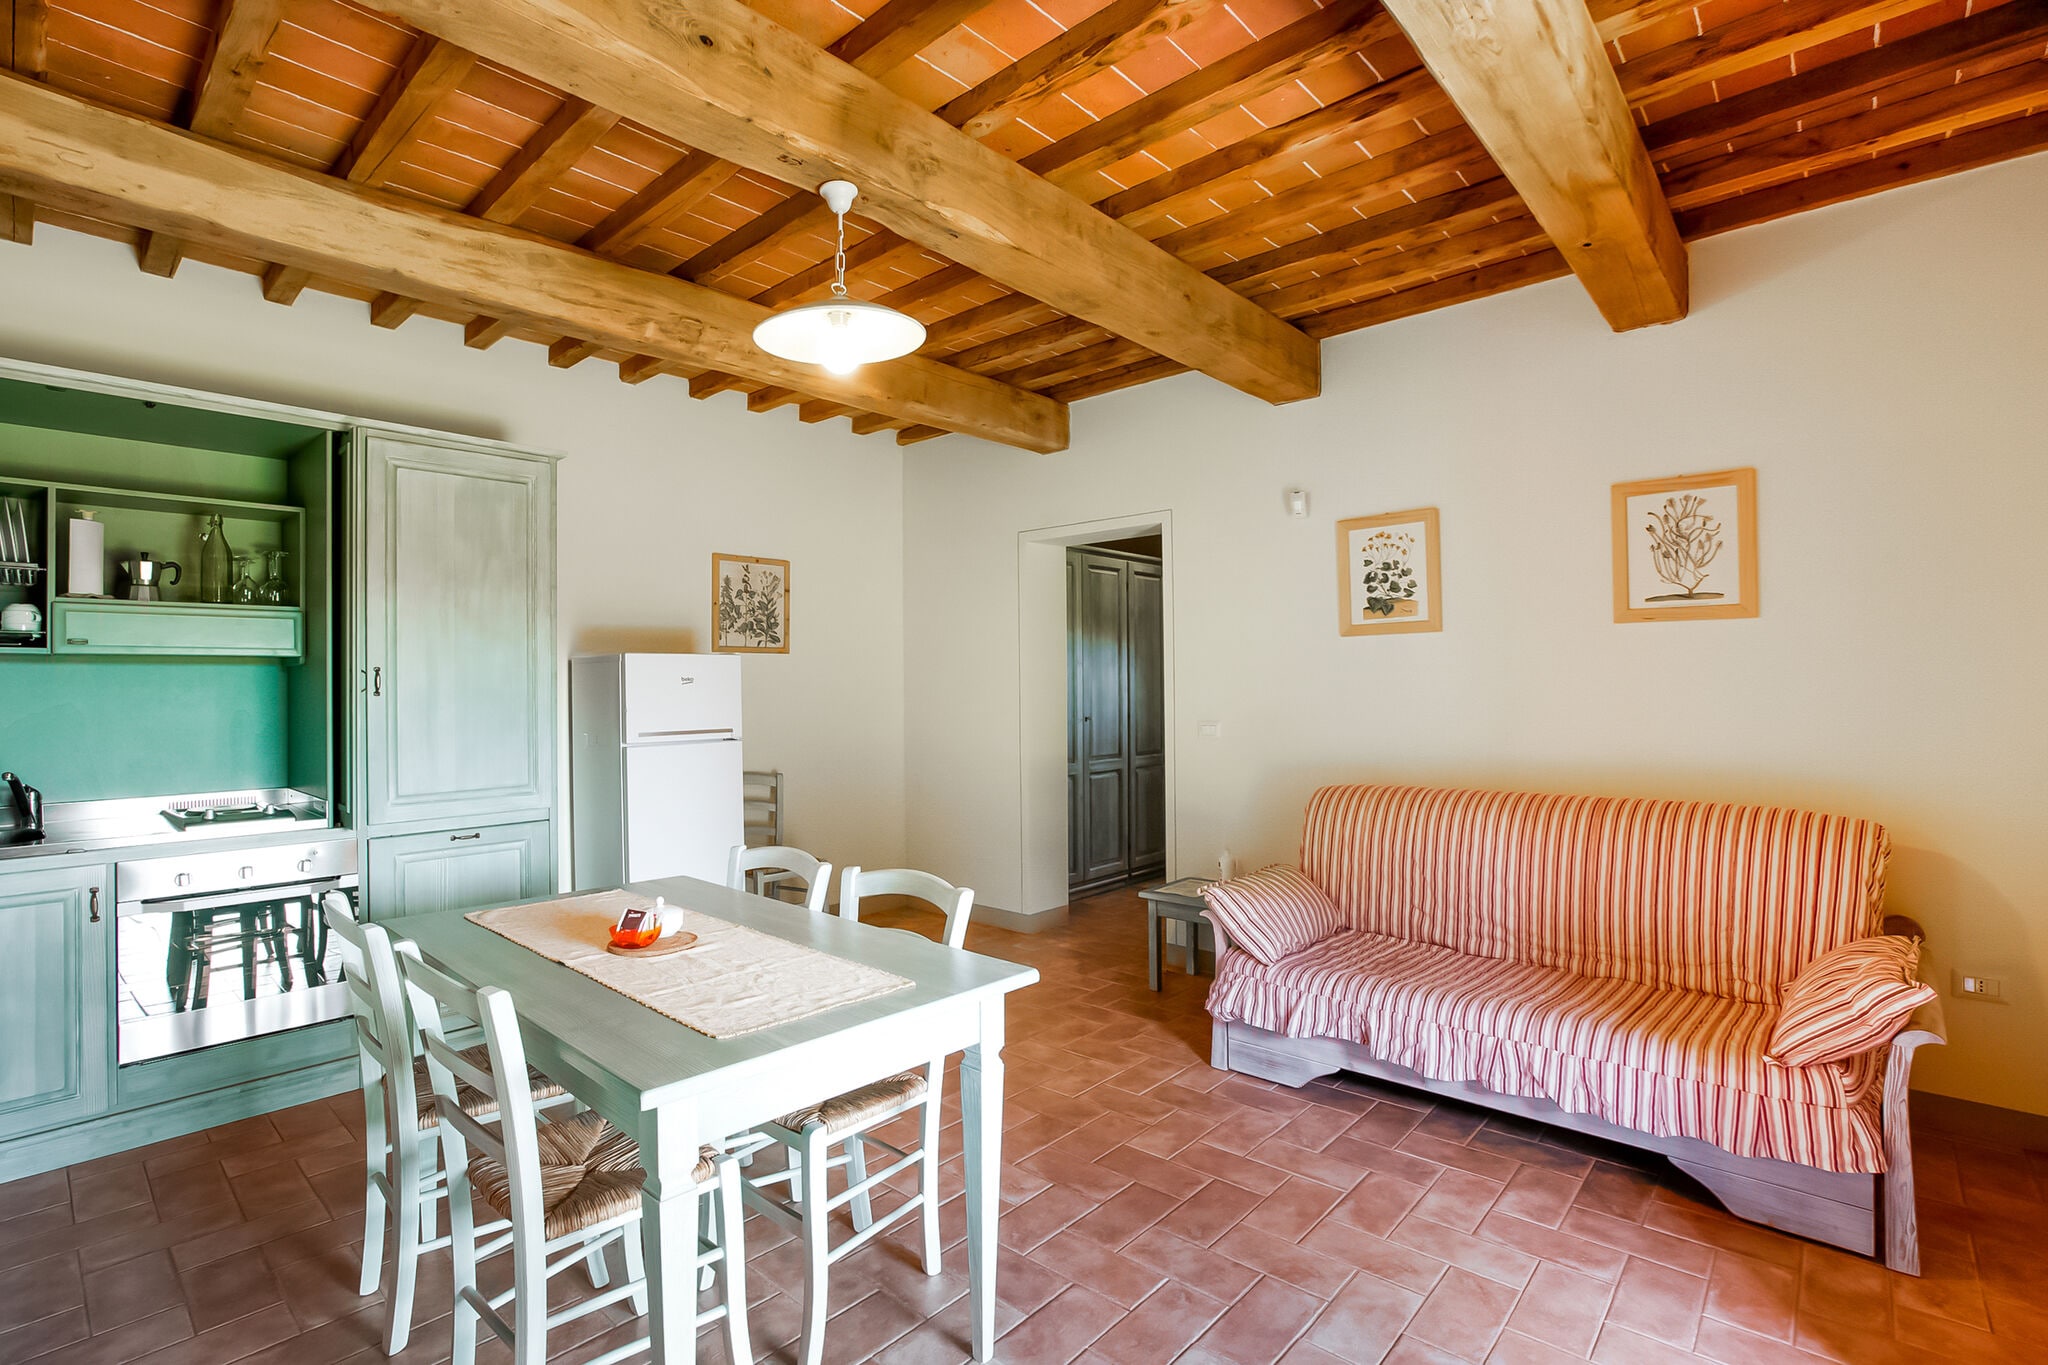 Apartment in a holiday home in Anghiari with a view of the hills